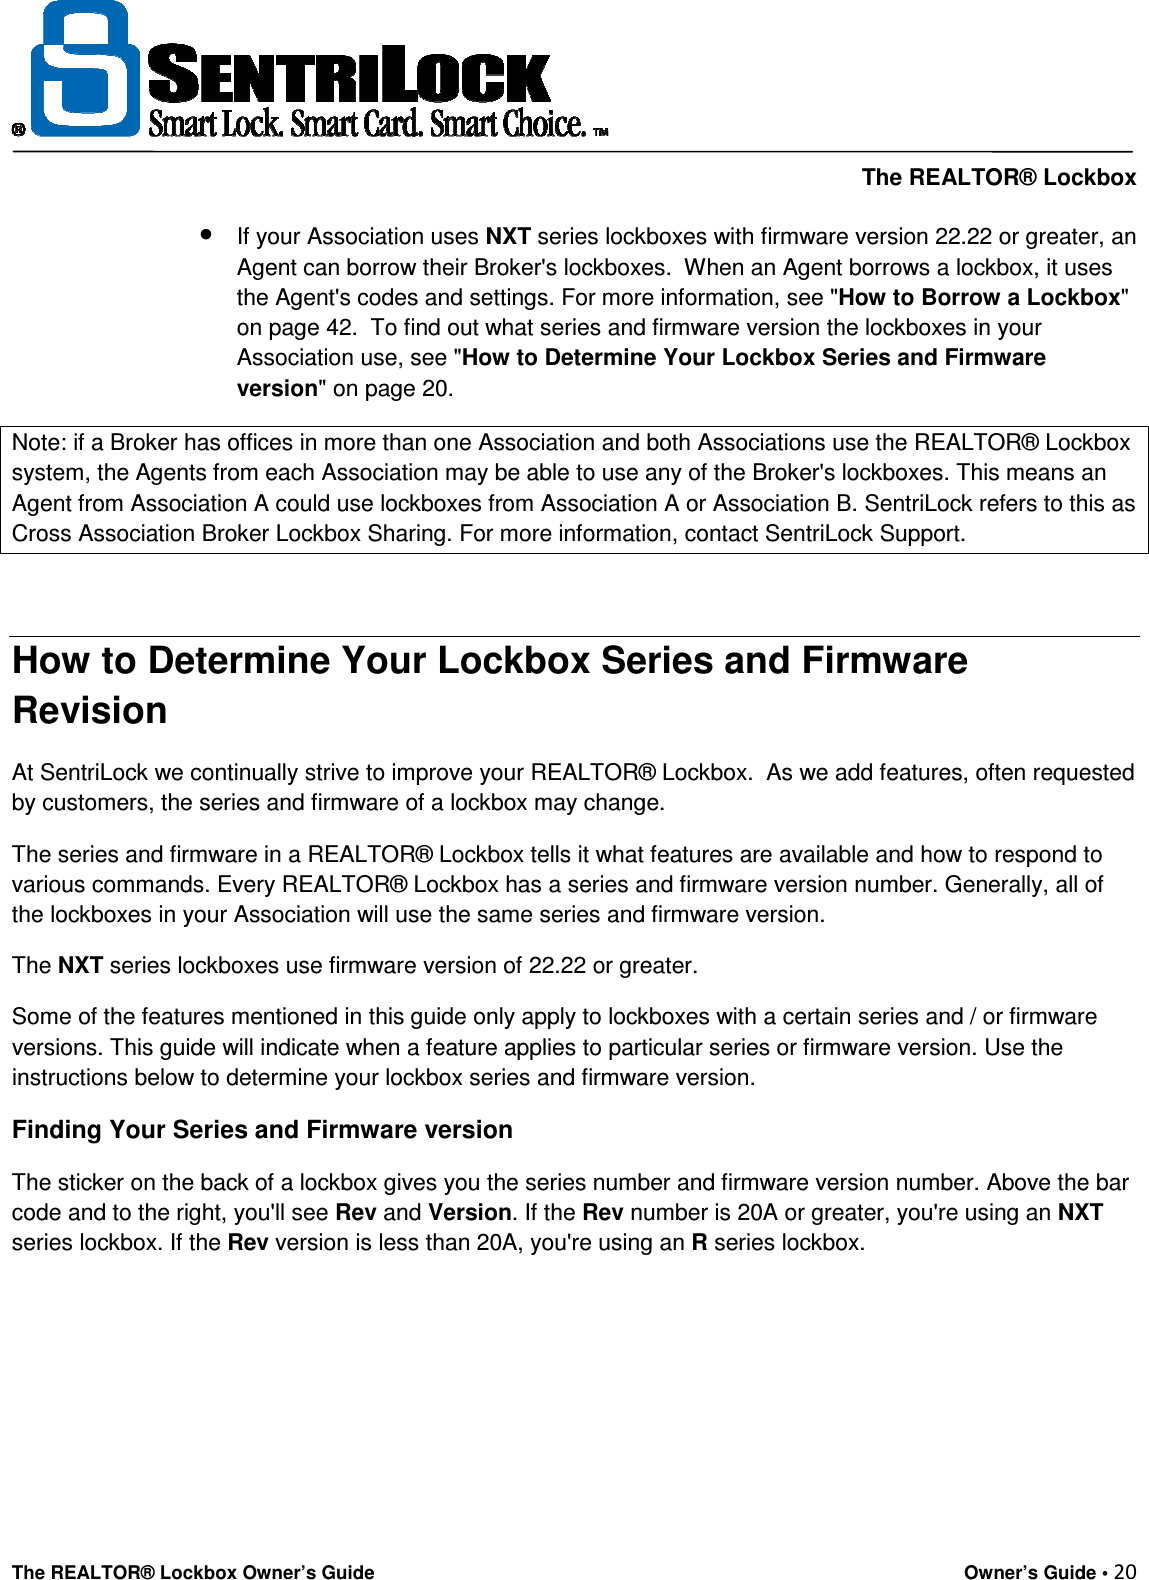     The REALTOR® Lockbox The REALTOR® Lockbox Owner’s Guide    Owner’s Guide • 20  • If your Association uses NXT series lockboxes with firmware version 22.22 or greater, an Agent can borrow their Broker&apos;s lockboxes.  When an Agent borrows a lockbox, it uses the Agent&apos;s codes and settings. For more information, see &quot;How to Borrow a Lockbox&quot; on page 42.  To find out what series and firmware version the lockboxes in your Association use, see &quot;How to Determine Your Lockbox Series and Firmware version&quot; on page 20. Note: if a Broker has offices in more than one Association and both Associations use the REALTOR® Lockbox system, the Agents from each Association may be able to use any of the Broker&apos;s lockboxes. This means an Agent from Association A could use lockboxes from Association A or Association B. SentriLock refers to this as Cross Association Broker Lockbox Sharing. For more information, contact SentriLock Support.  How to Determine Your Lockbox Series and Firmware  Revision At SentriLock we continually strive to improve your REALTOR® Lockbox.  As we add features, often requested by customers, the series and firmware of a lockbox may change. The series and firmware in a REALTOR® Lockbox tells it what features are available and how to respond to various commands. Every REALTOR® Lockbox has a series and firmware version number. Generally, all of the lockboxes in your Association will use the same series and firmware version.  The NXT series lockboxes use firmware version of 22.22 or greater.  Some of the features mentioned in this guide only apply to lockboxes with a certain series and / or firmware versions. This guide will indicate when a feature applies to particular series or firmware version. Use the instructions below to determine your lockbox series and firmware version.  Finding Your Series and Firmware version  The sticker on the back of a lockbox gives you the series number and firmware version number. Above the bar code and to the right, you&apos;ll see Rev and Version. If the Rev number is 20A or greater, you&apos;re using an NXT series lockbox. If the Rev version is less than 20A, you&apos;re using an R series lockbox.       